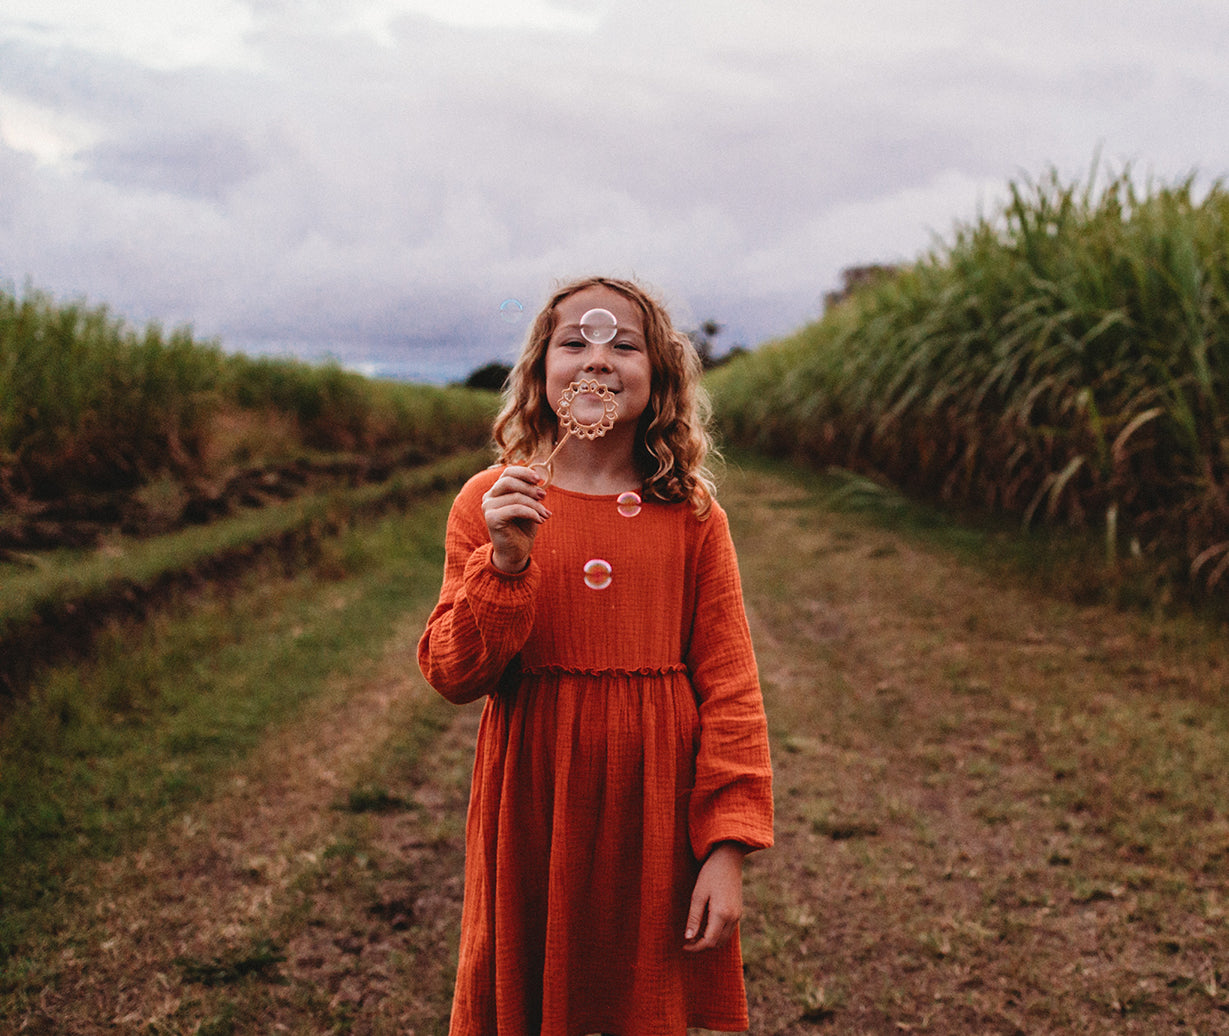 A girl in an orange dress holding the sunflower shaped eco bubble wand from Kinfolk Pantry - there are a few bubble that haven't yet been popped!